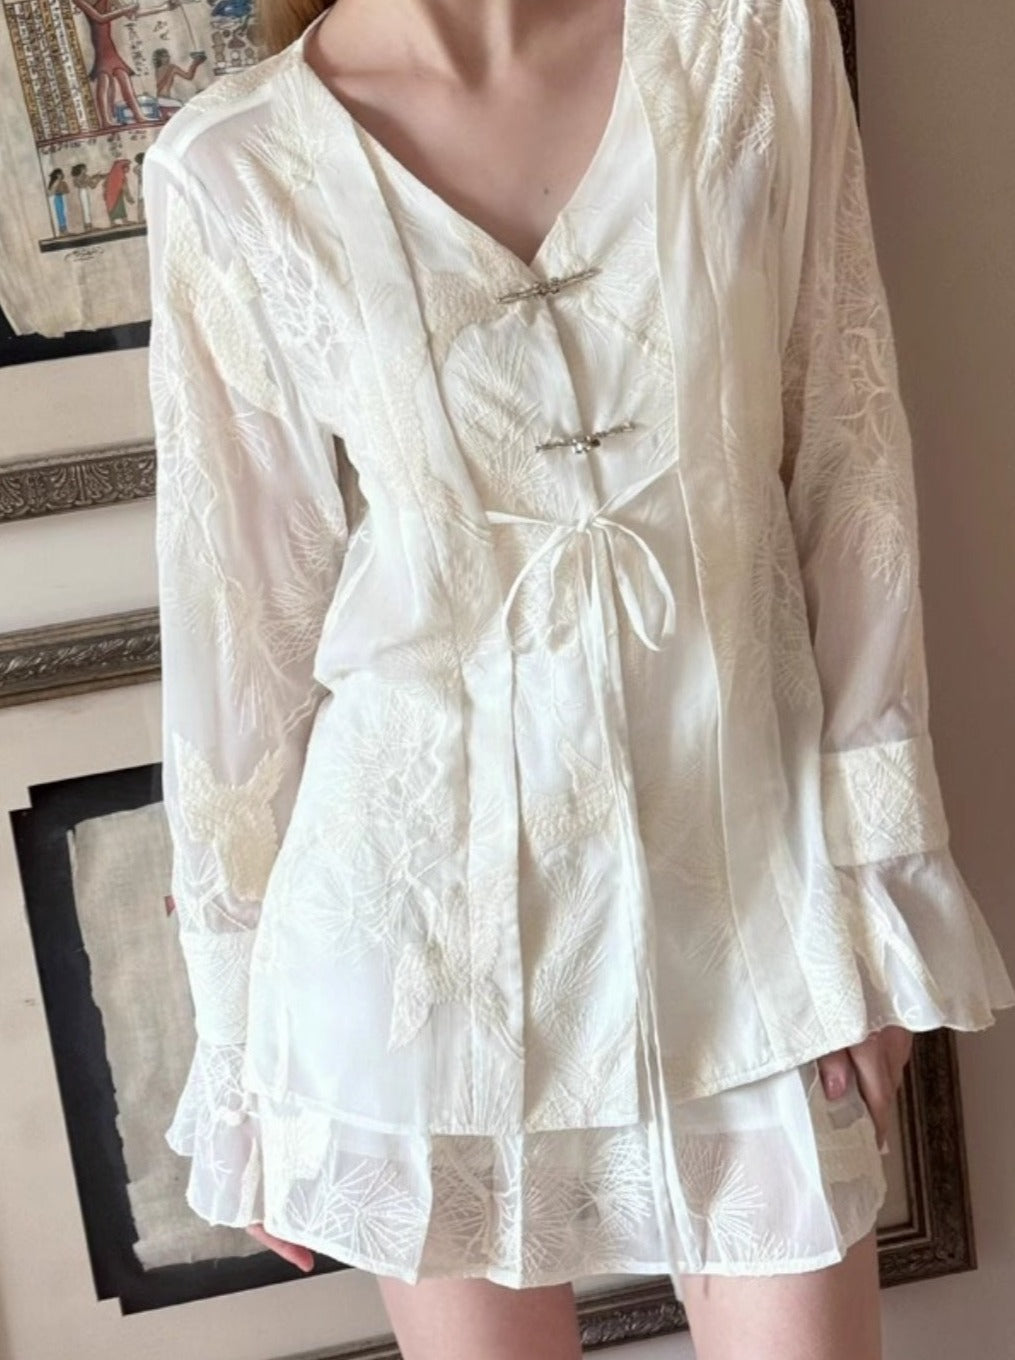 Chinese White Lace Stitched V-neck Long-sleeved Top